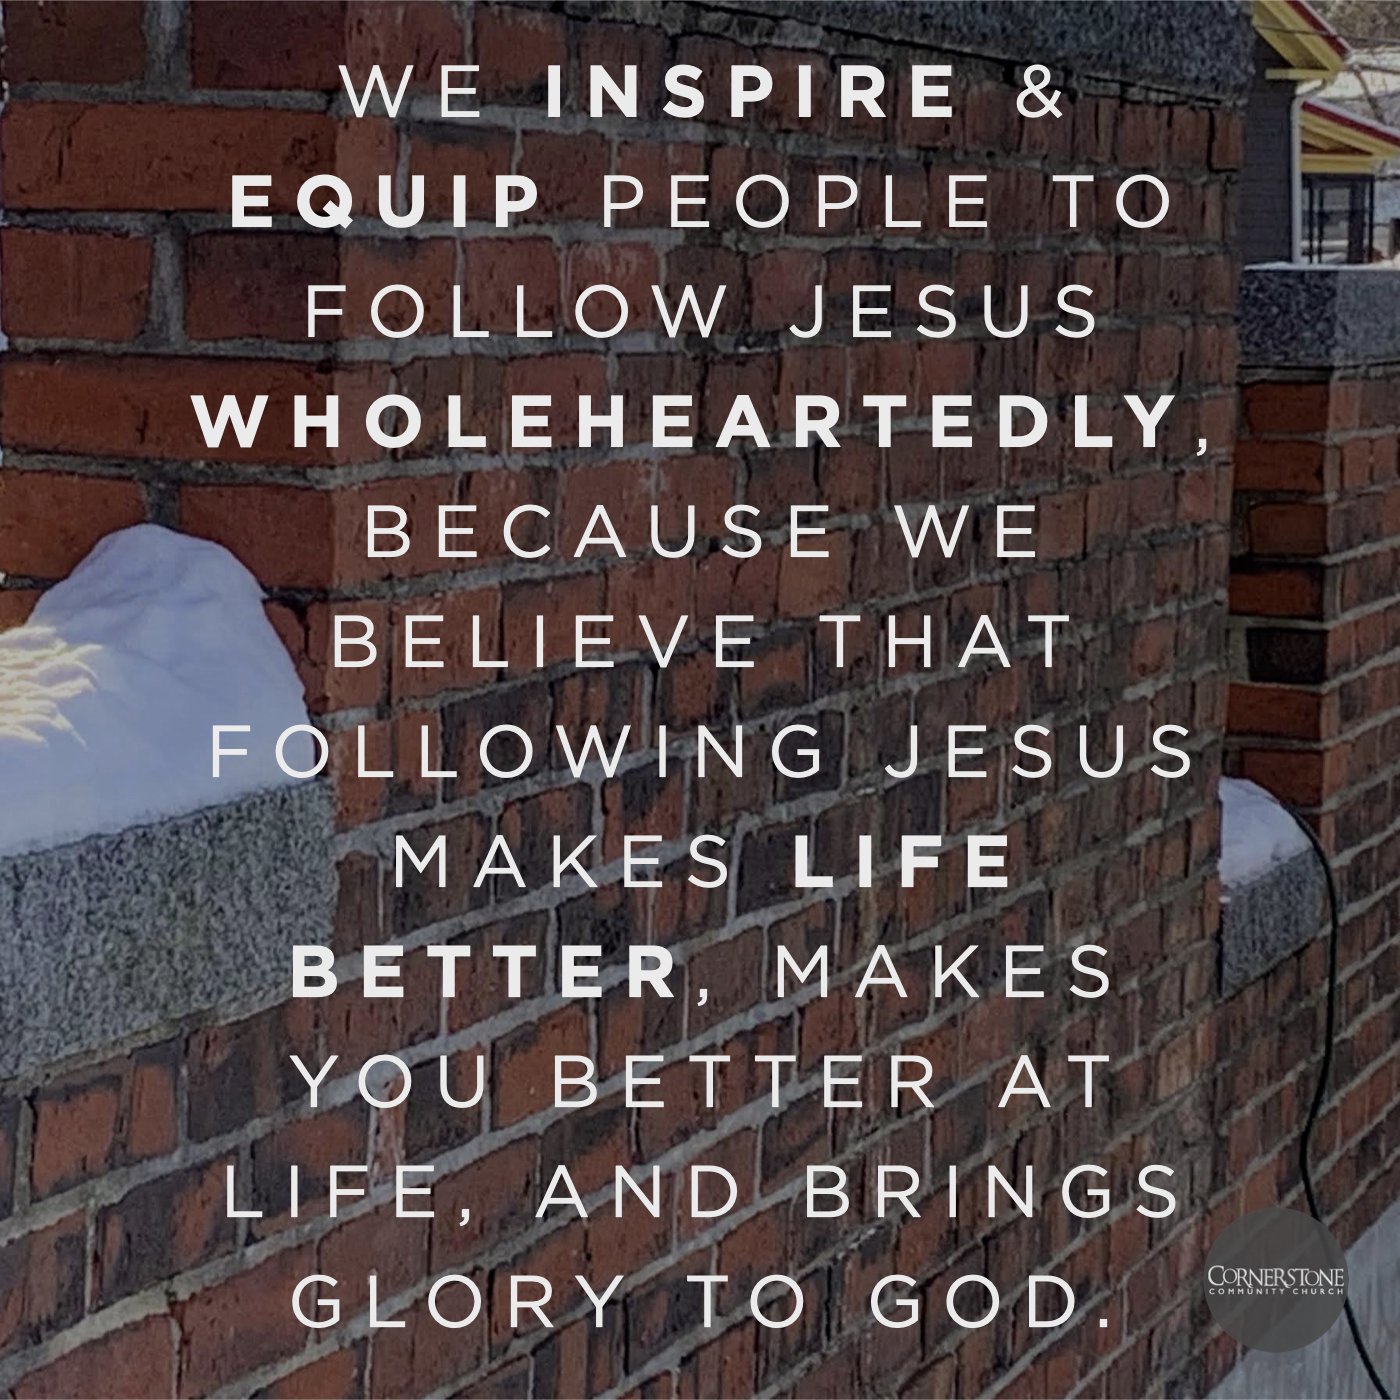 We inspire & equip people to follow Jesus wholeheartedly, because we believe that following Jesus makes life better, makes you better at life, and brings glory to God.